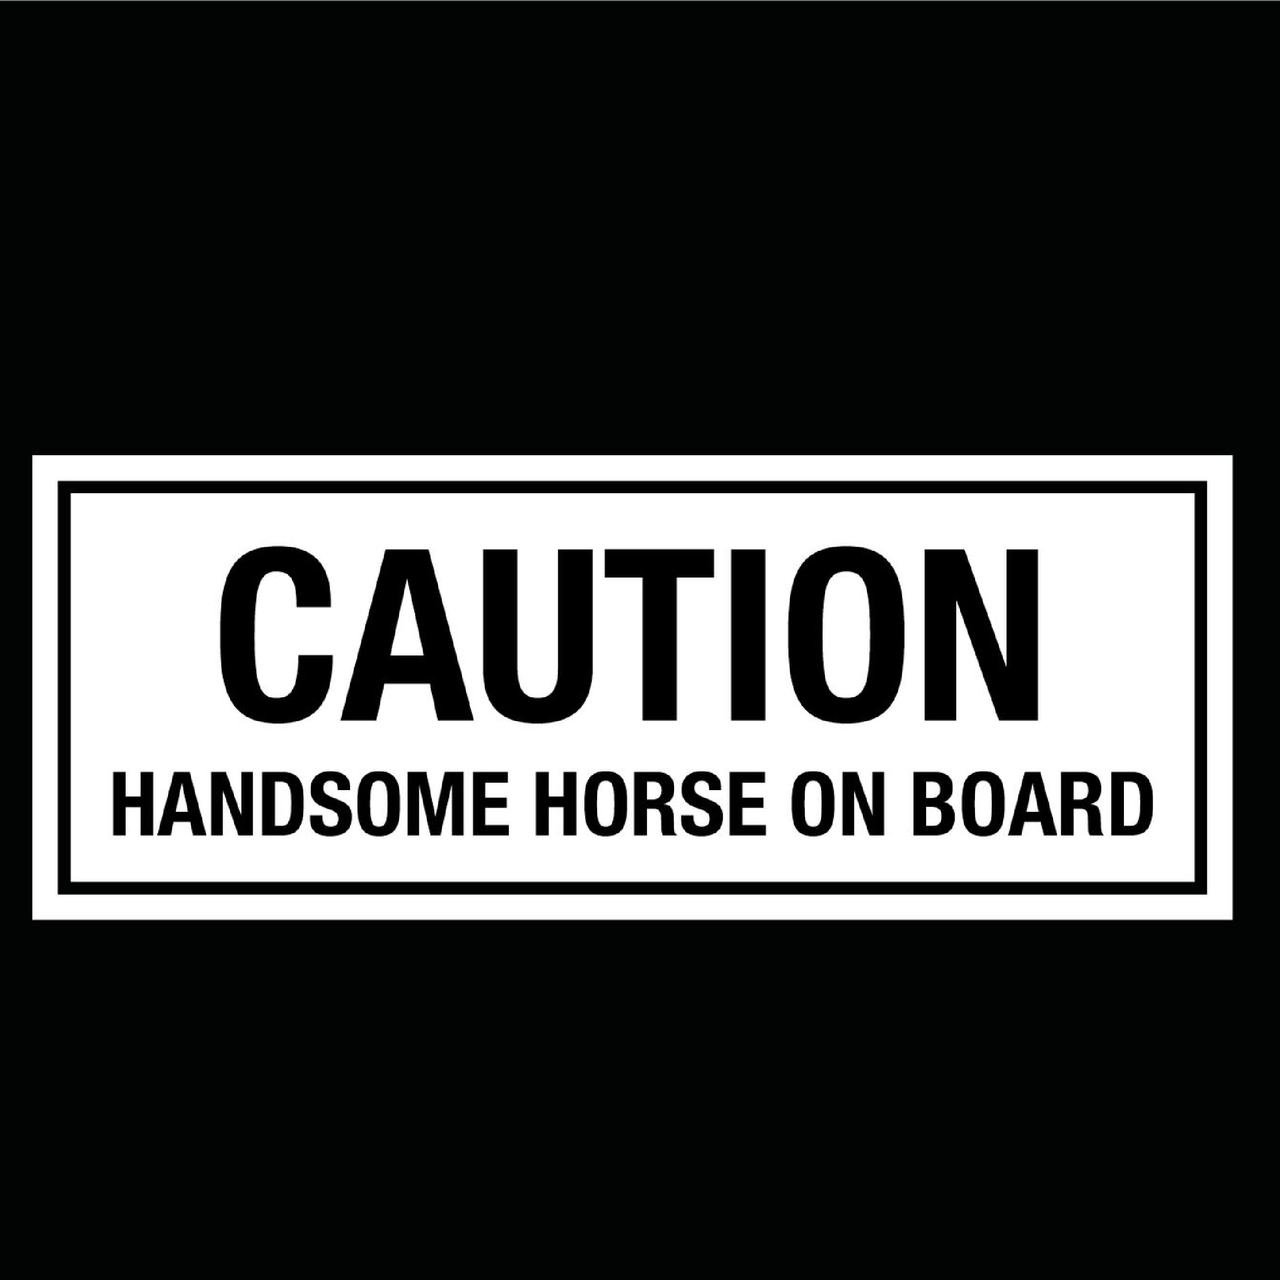 Caution Handsome Horse on Board - Horsebox Decal